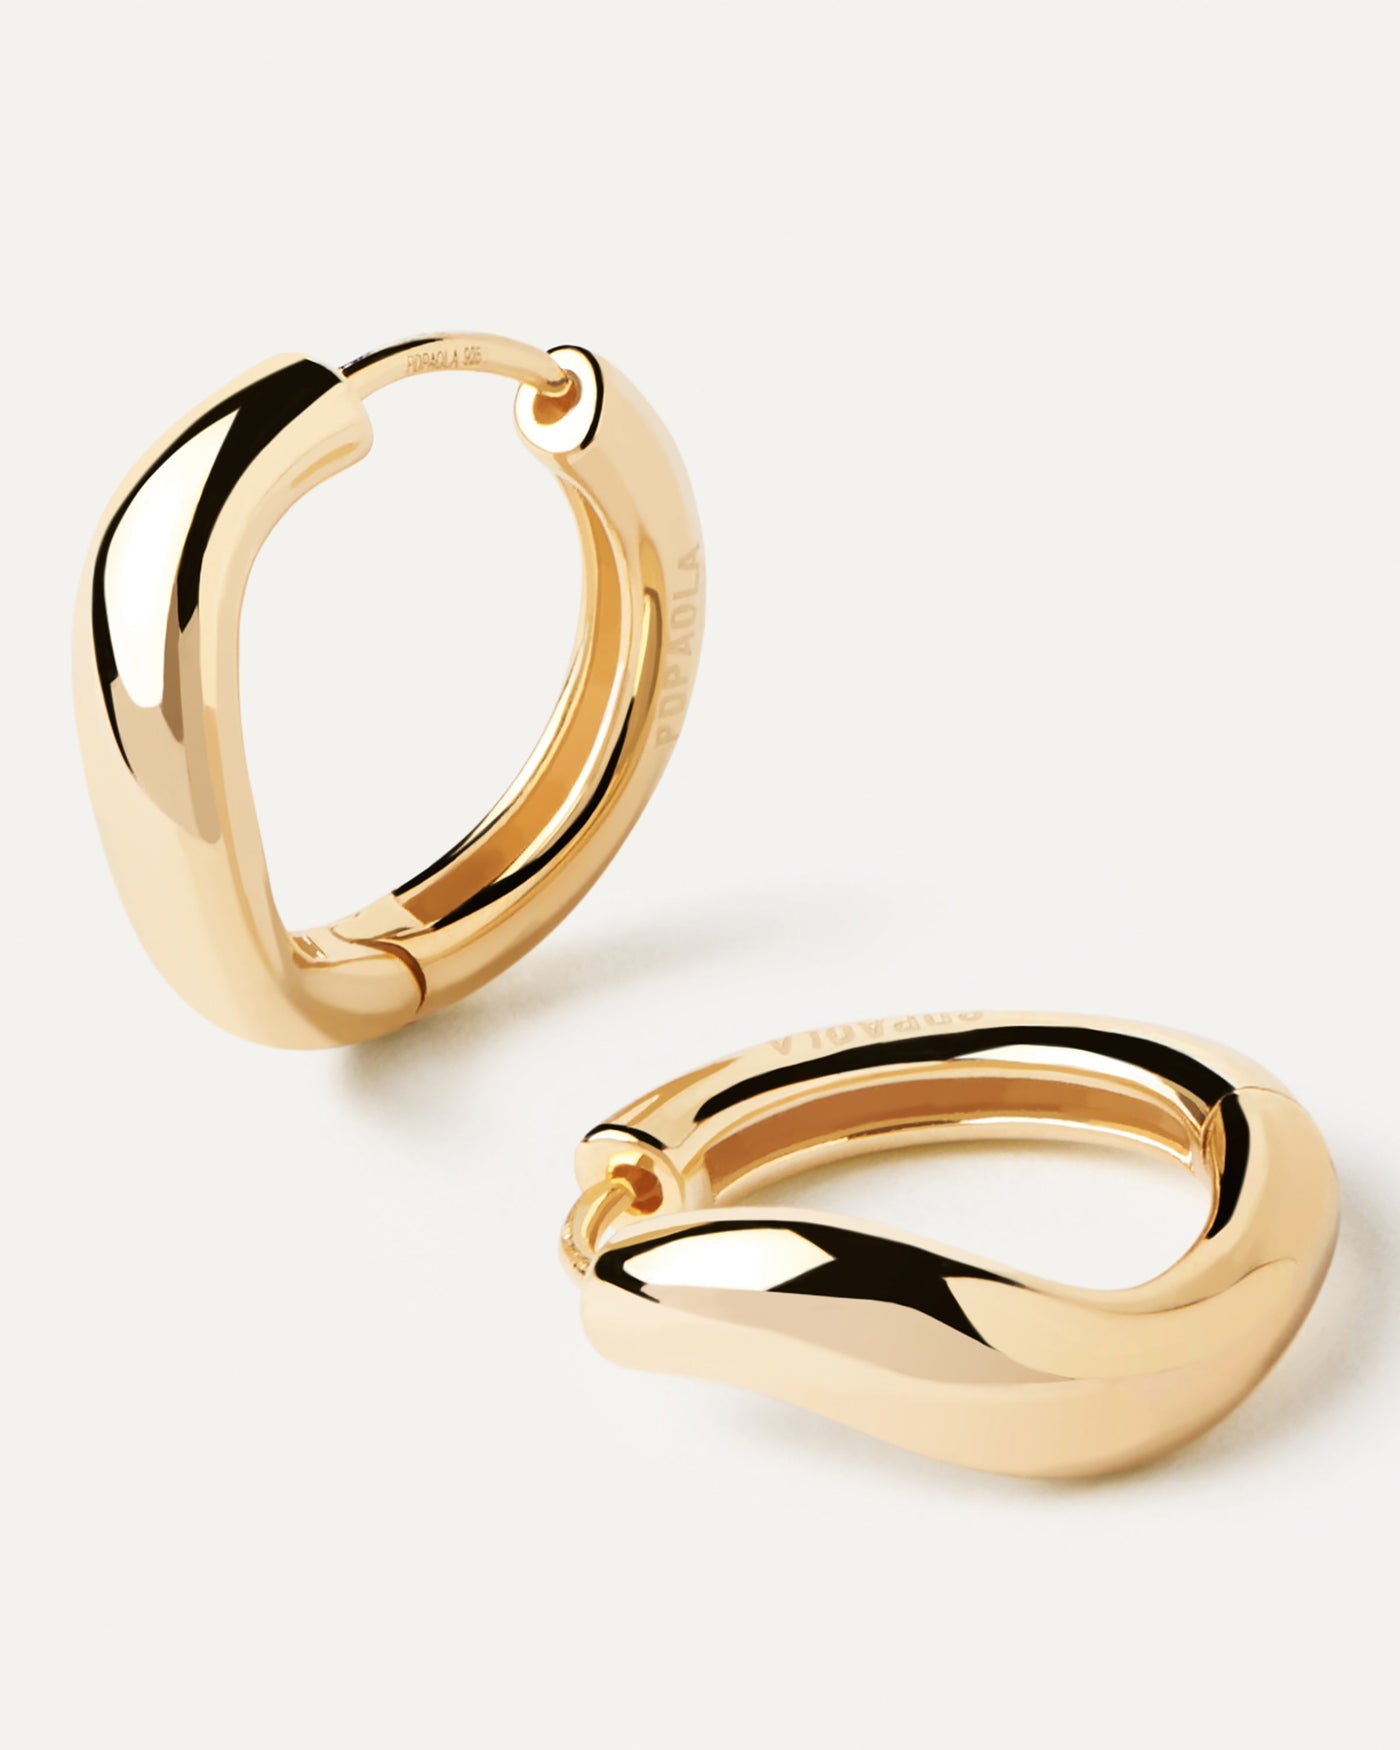 2023 Selection | Gold Celeste Hoops. Wavy plain band hoop earrings in solid yellow gold. Get the latest arrival from PDPAOLA. Place your order safely and get this Best Seller. Free Shipping.